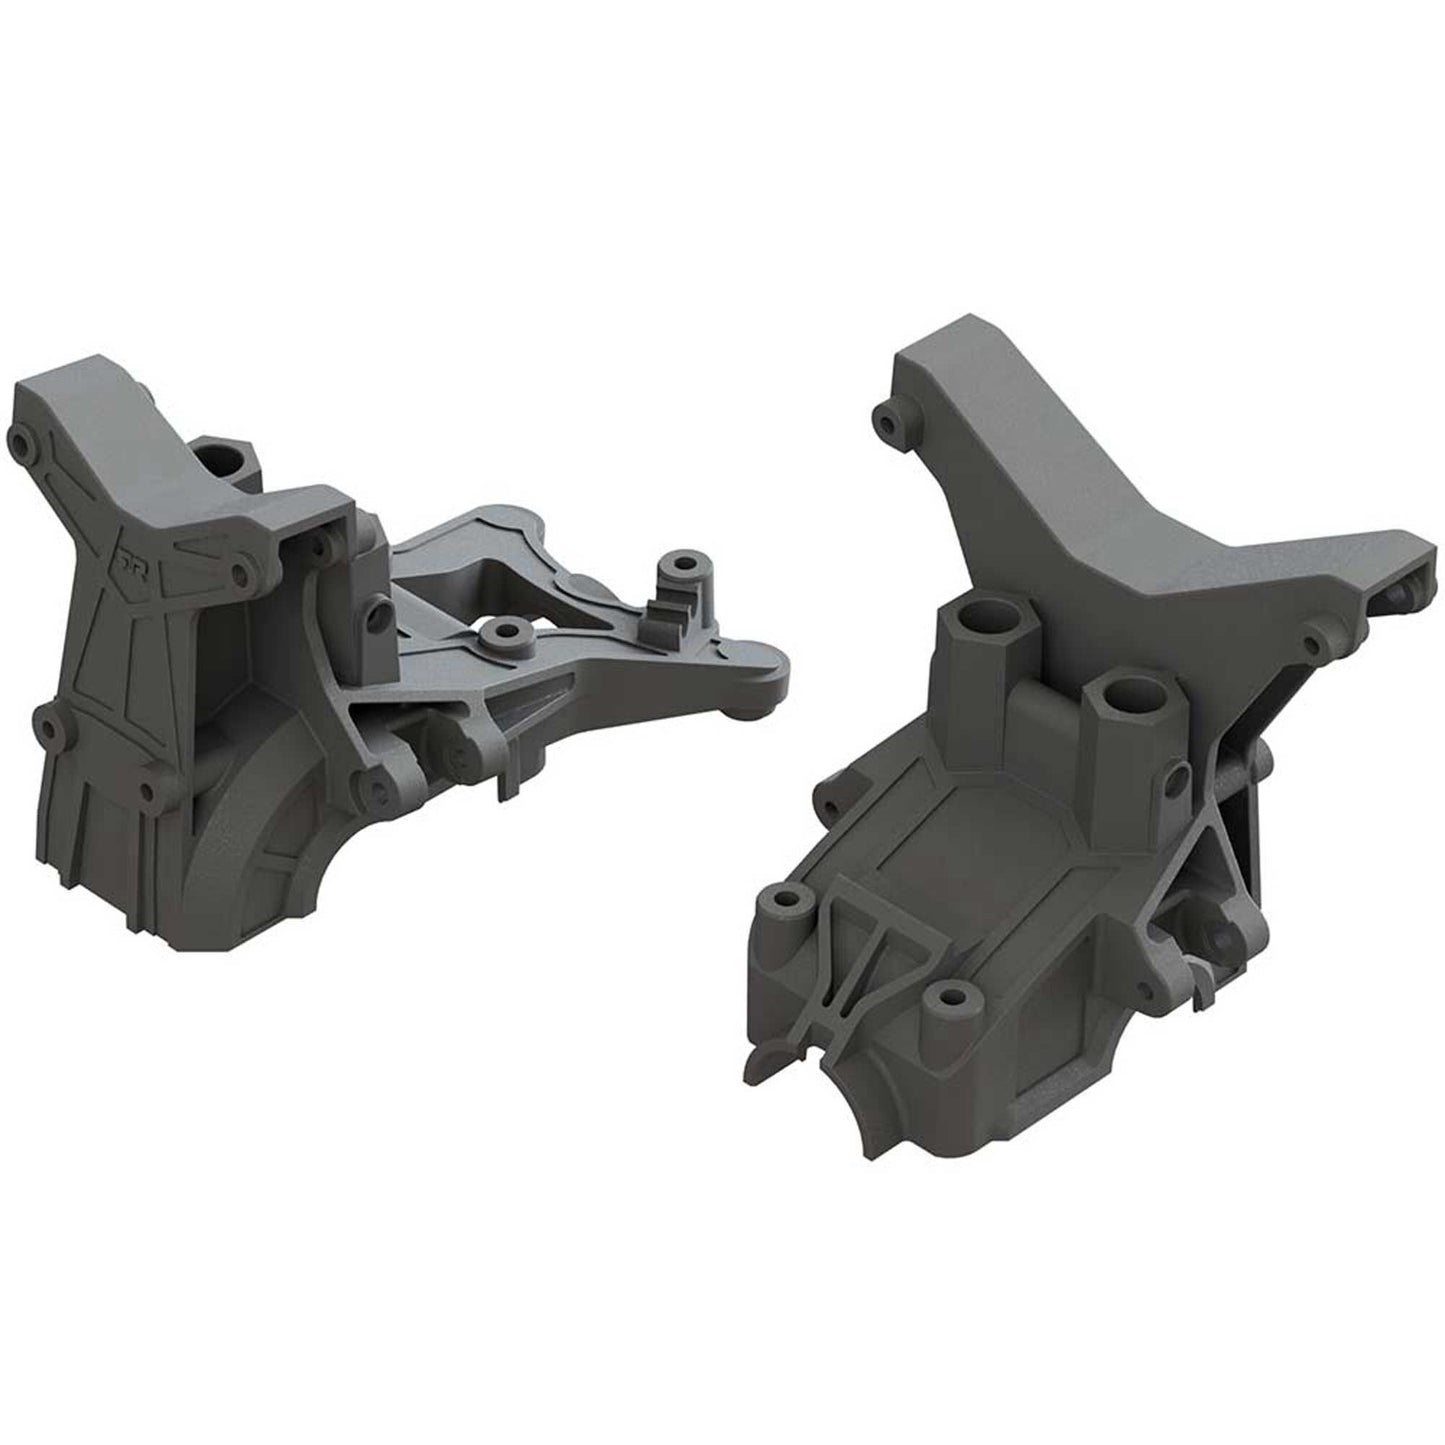 AR320399 Composite Front Rear Upper Gearbox Covers and Shock Tower